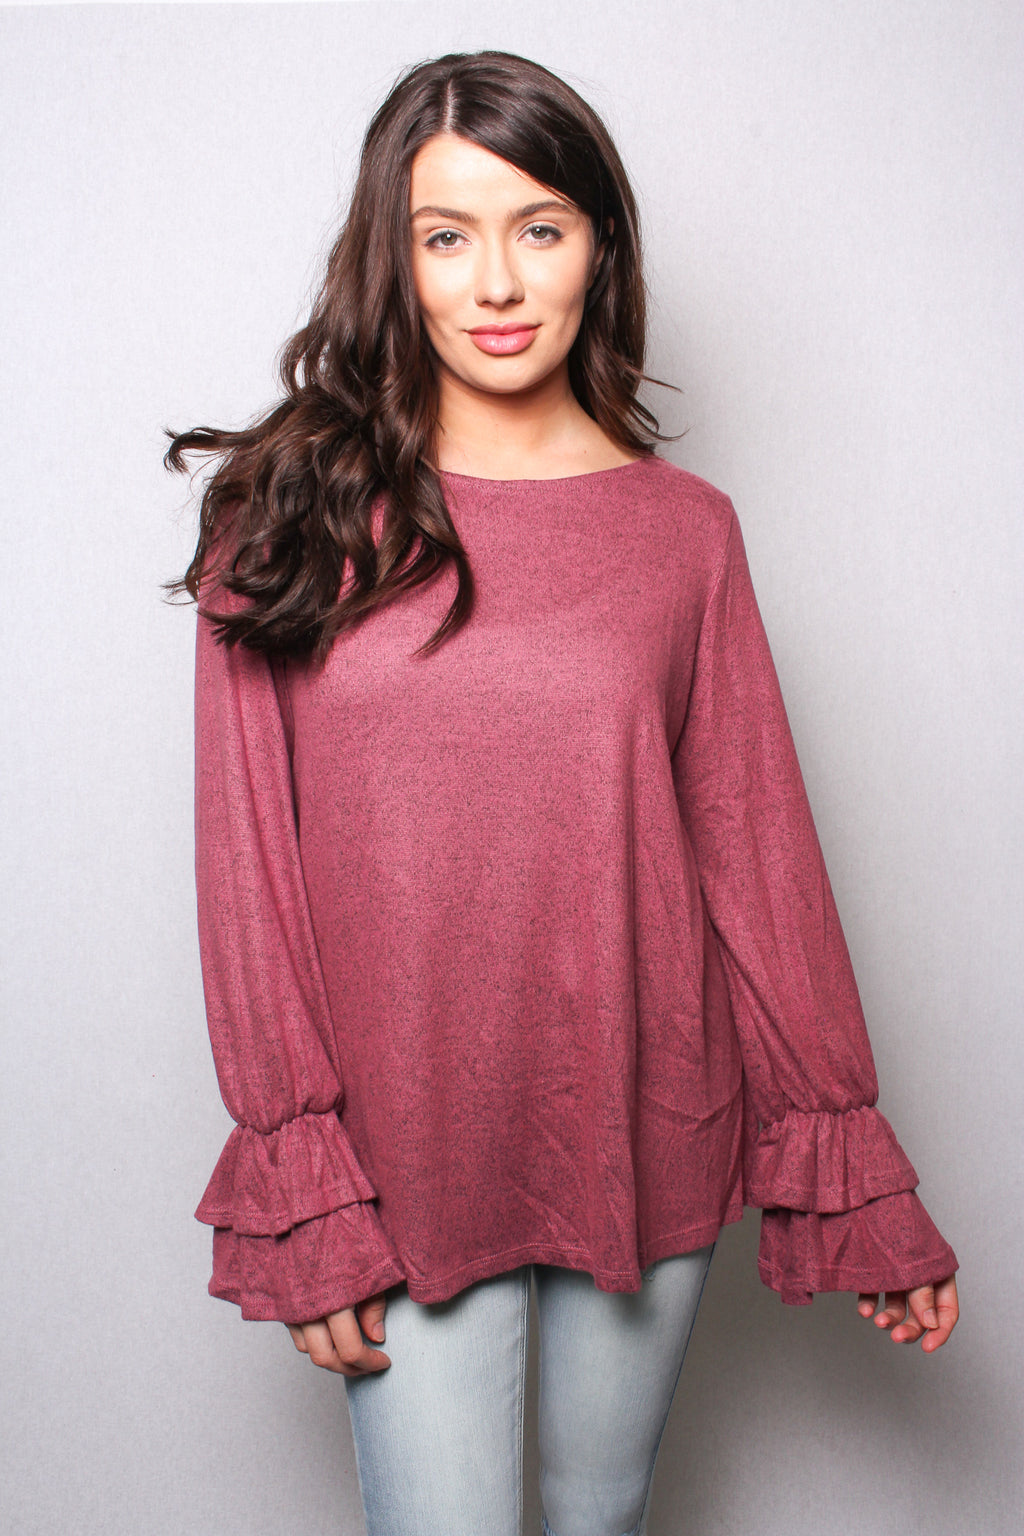 Women's Round Neck Ruffle Long Sleeves Knit Heather Top